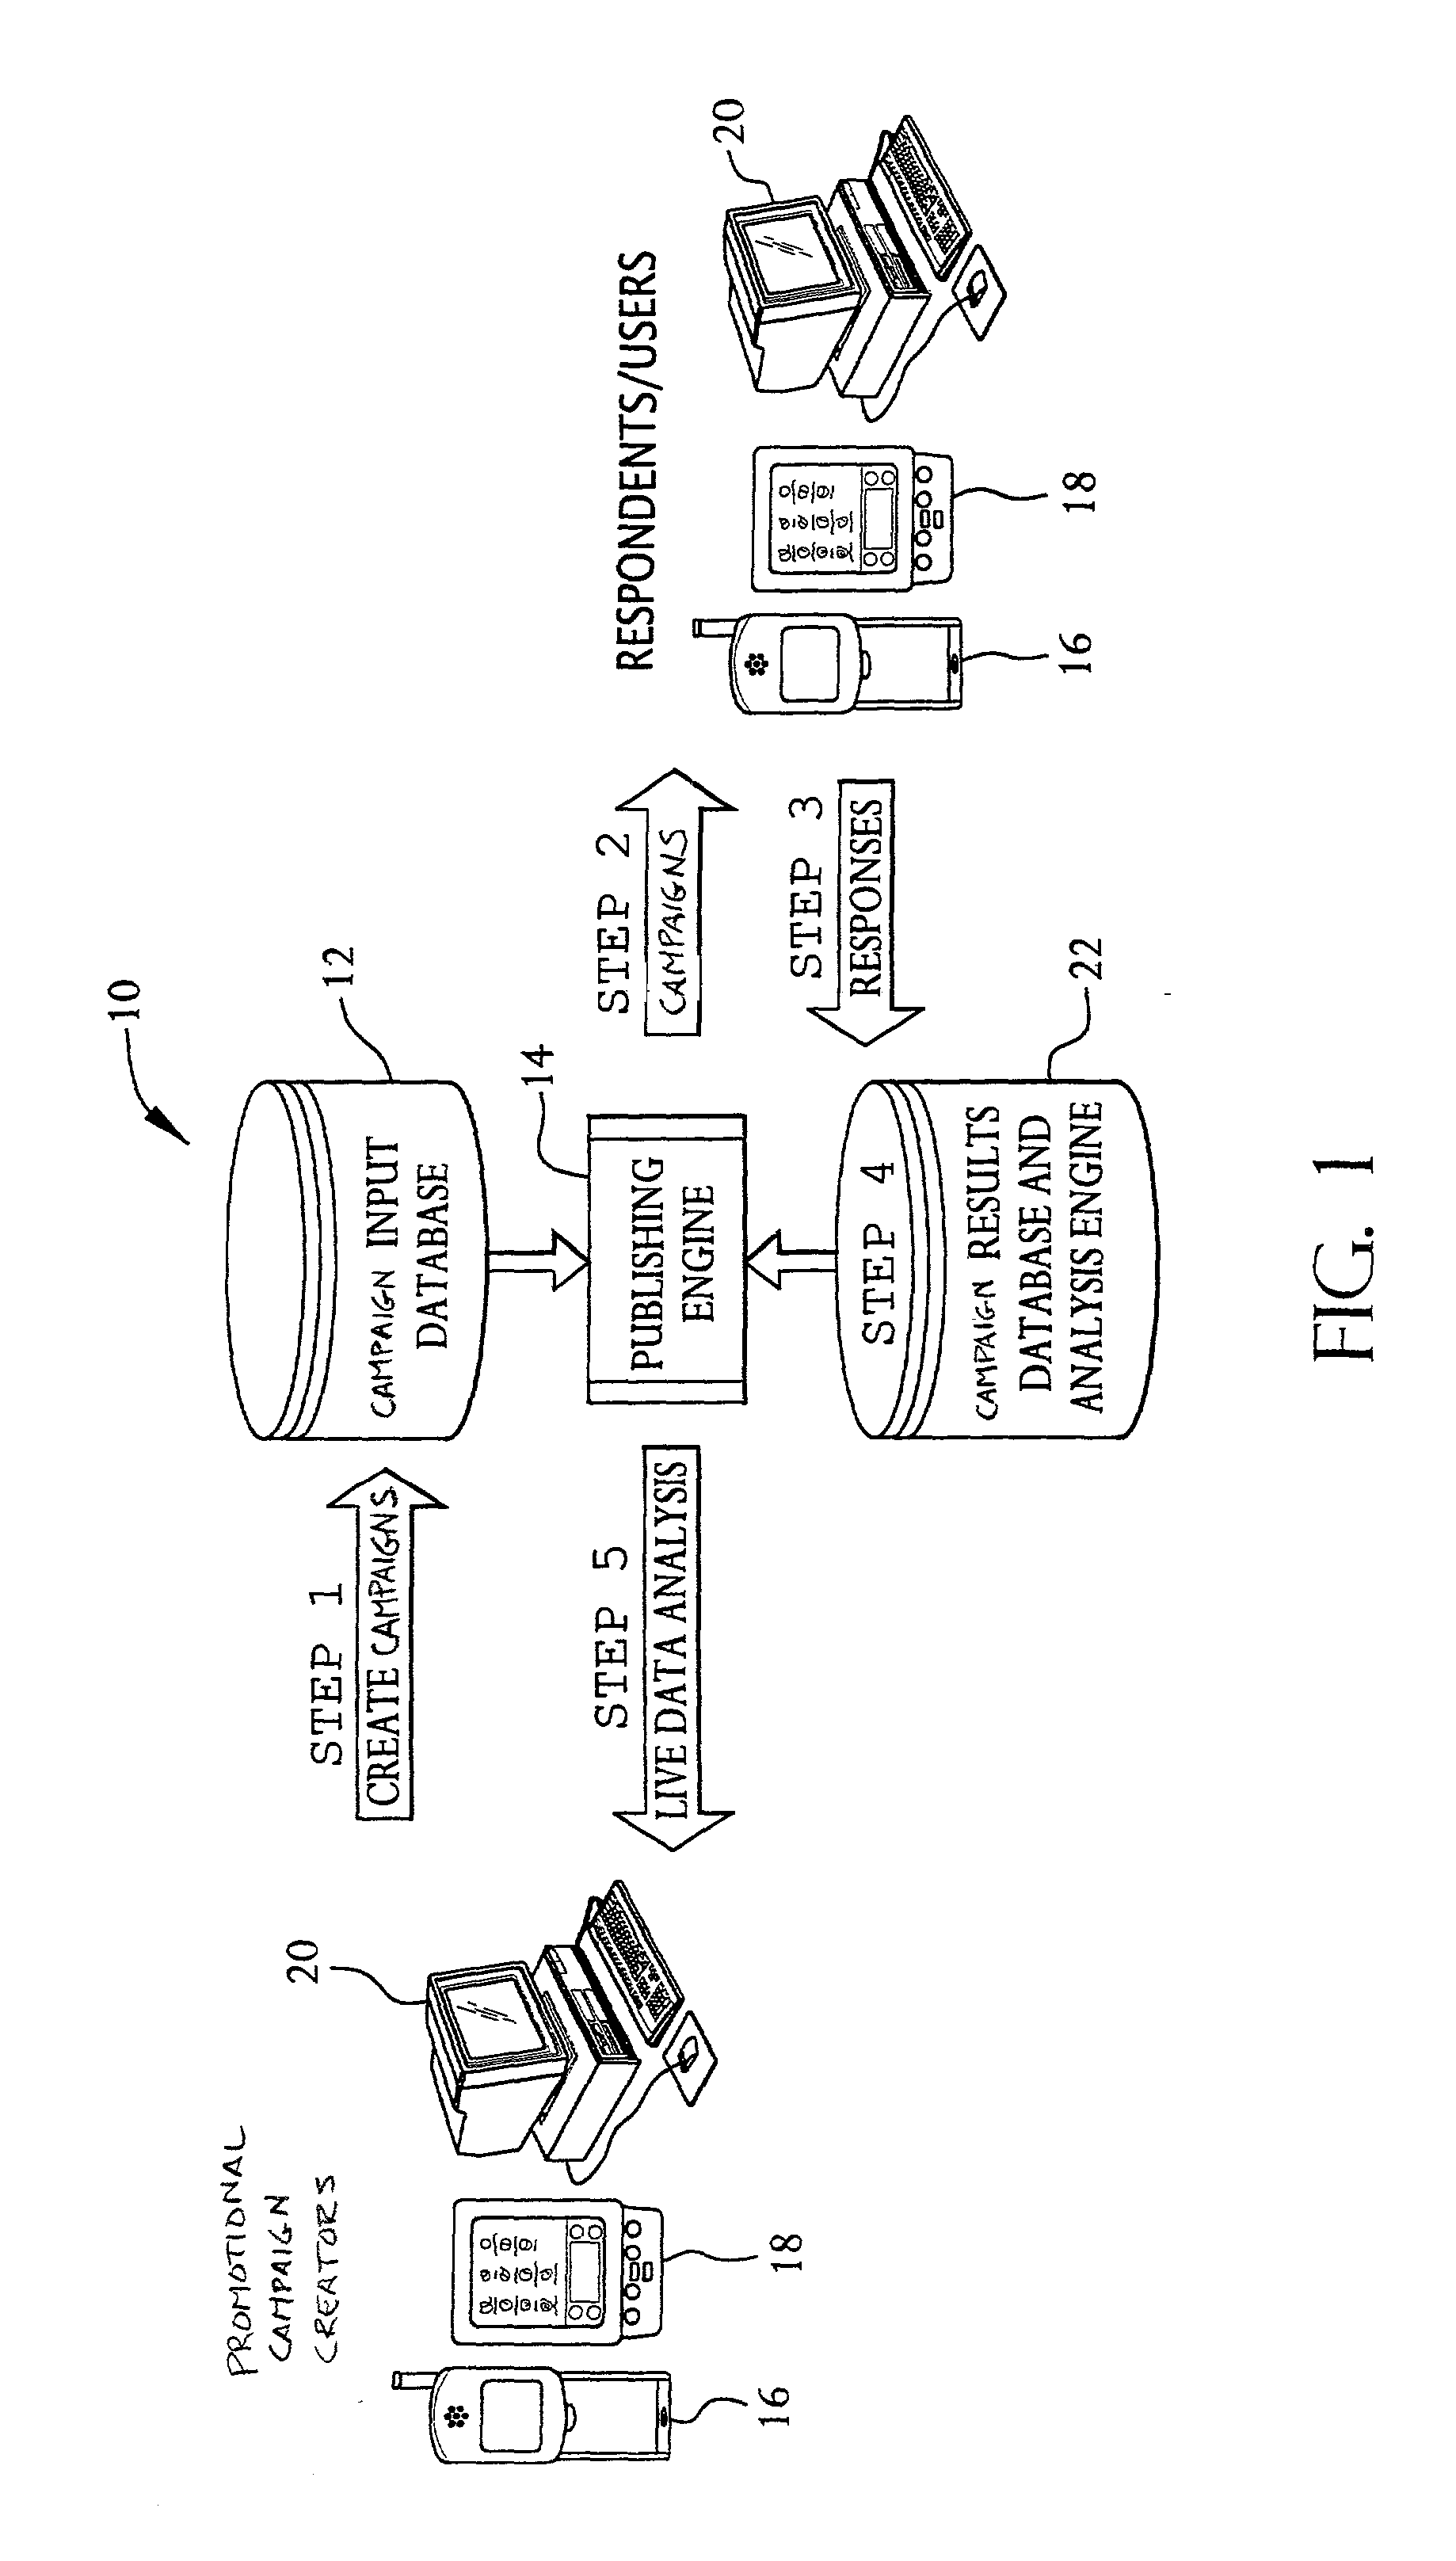 System for conducting user-specific promotional campaigns using multiple communications device platforms